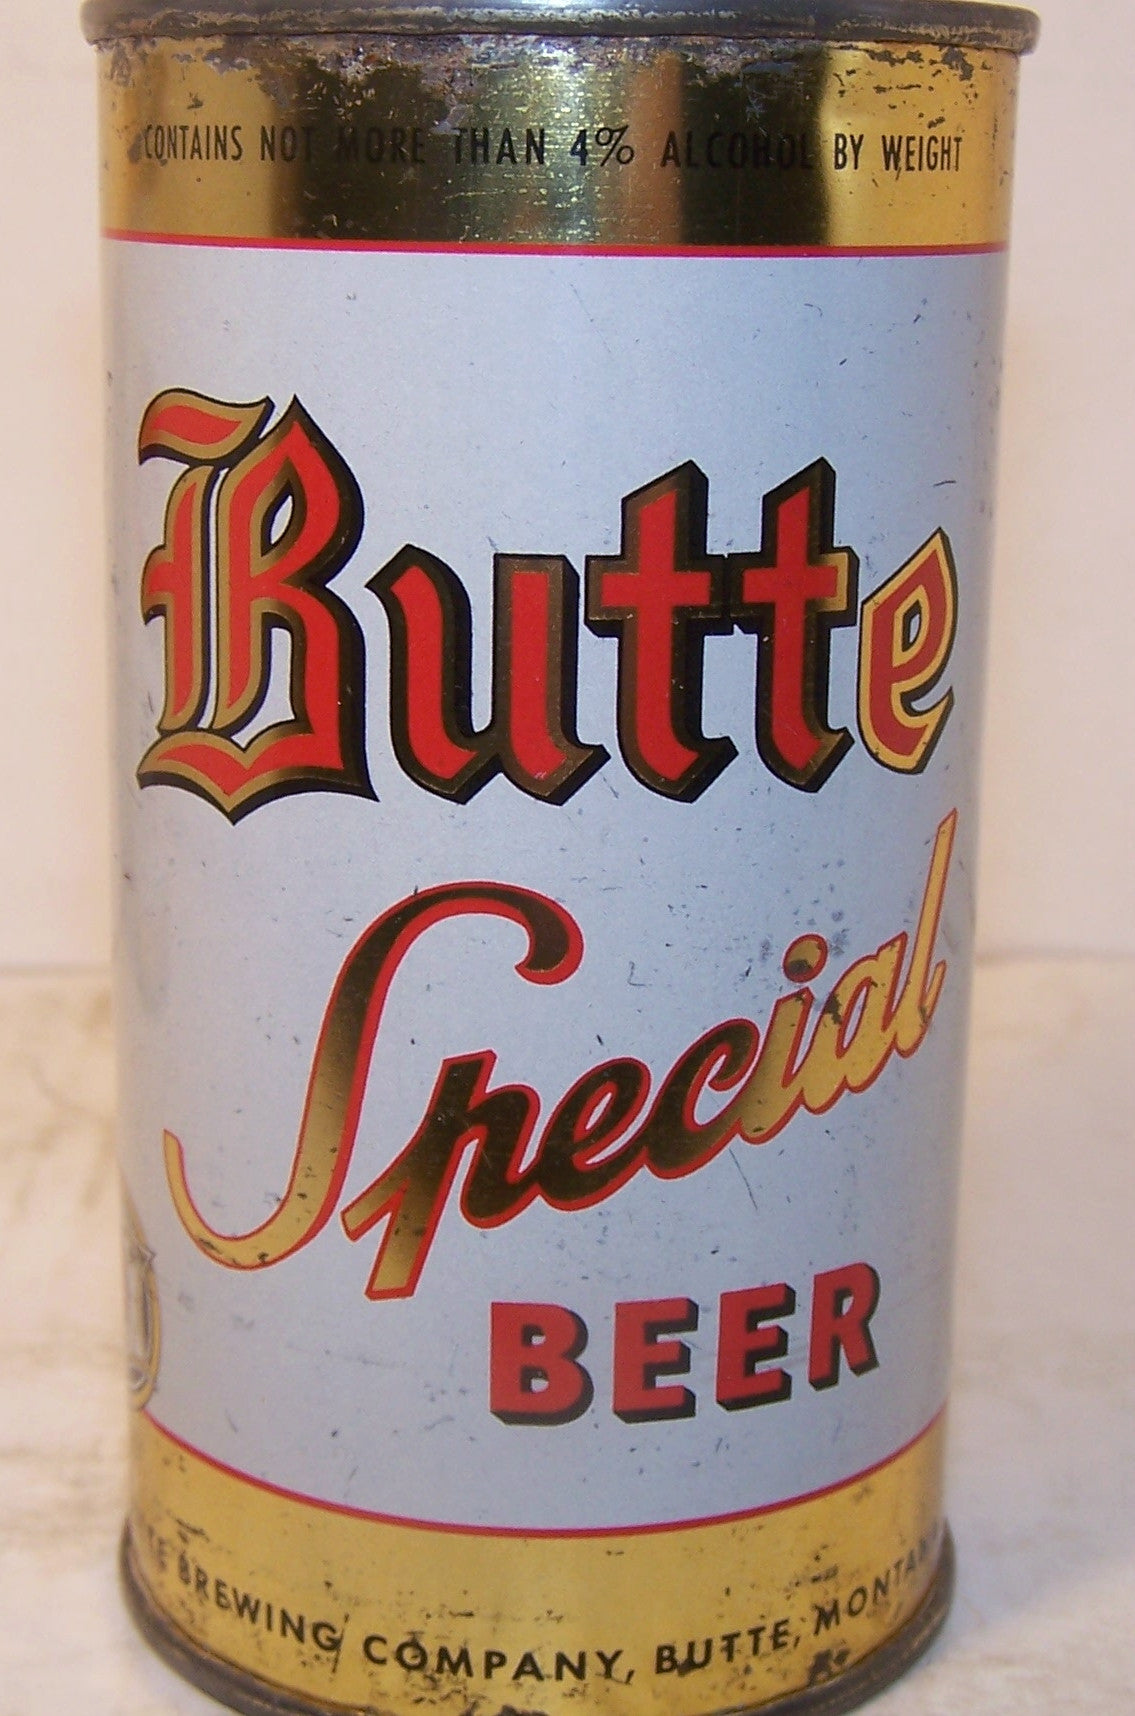 Butte Special Beer, USBC 47-30, Grade 1- Sold on 02/07/17